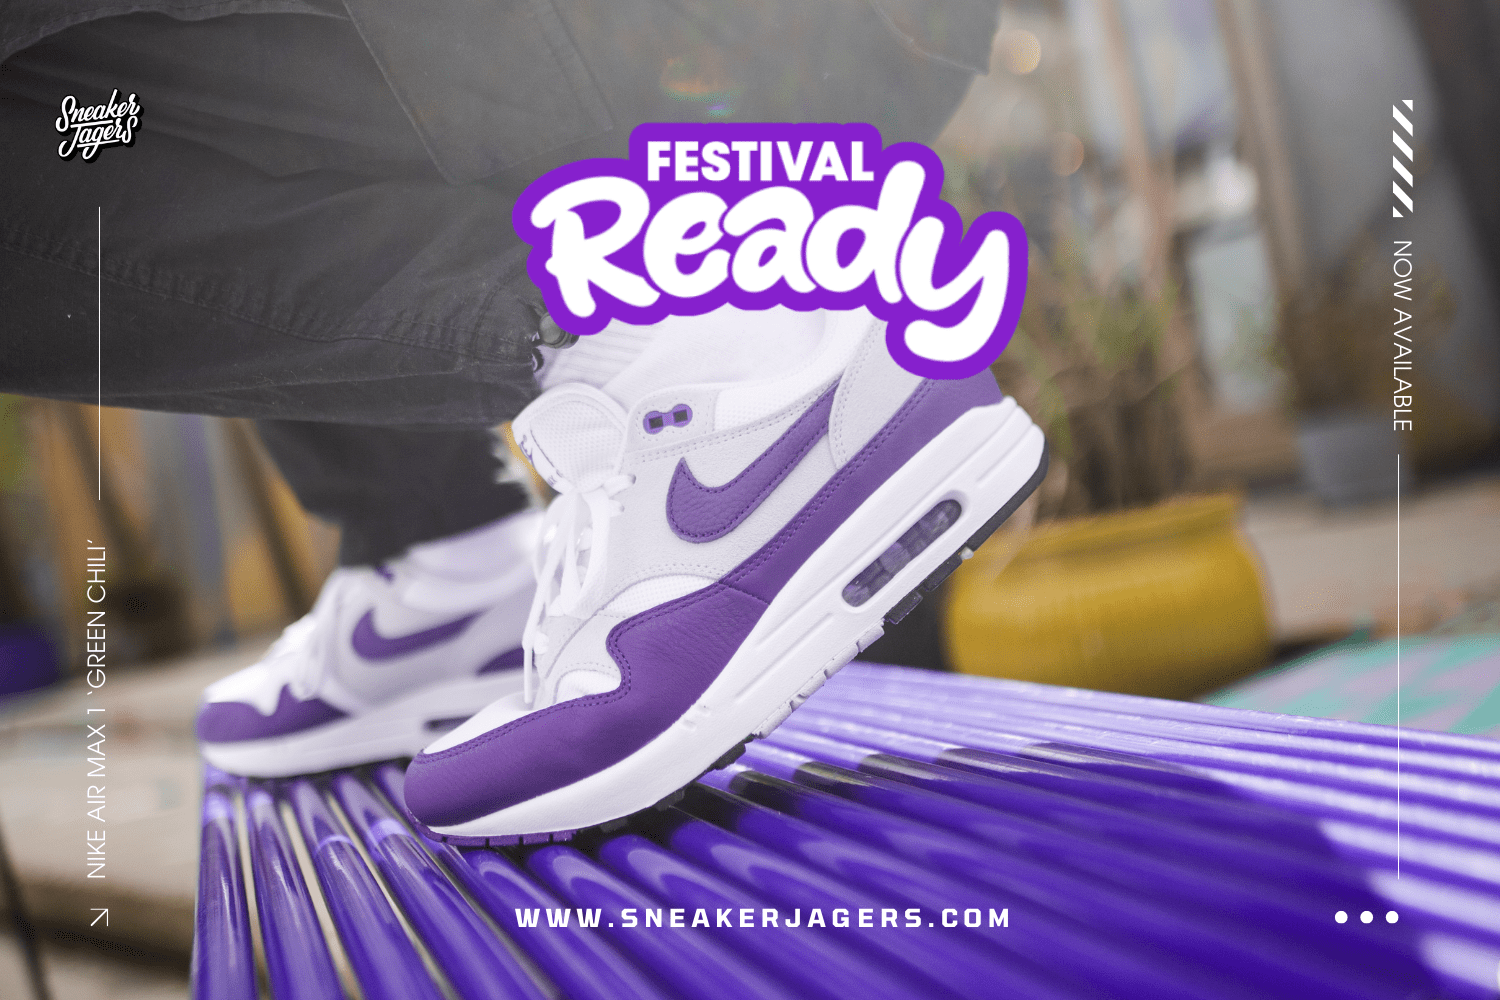 Get Festival Ready with Sneakerjagers - Outfit 7